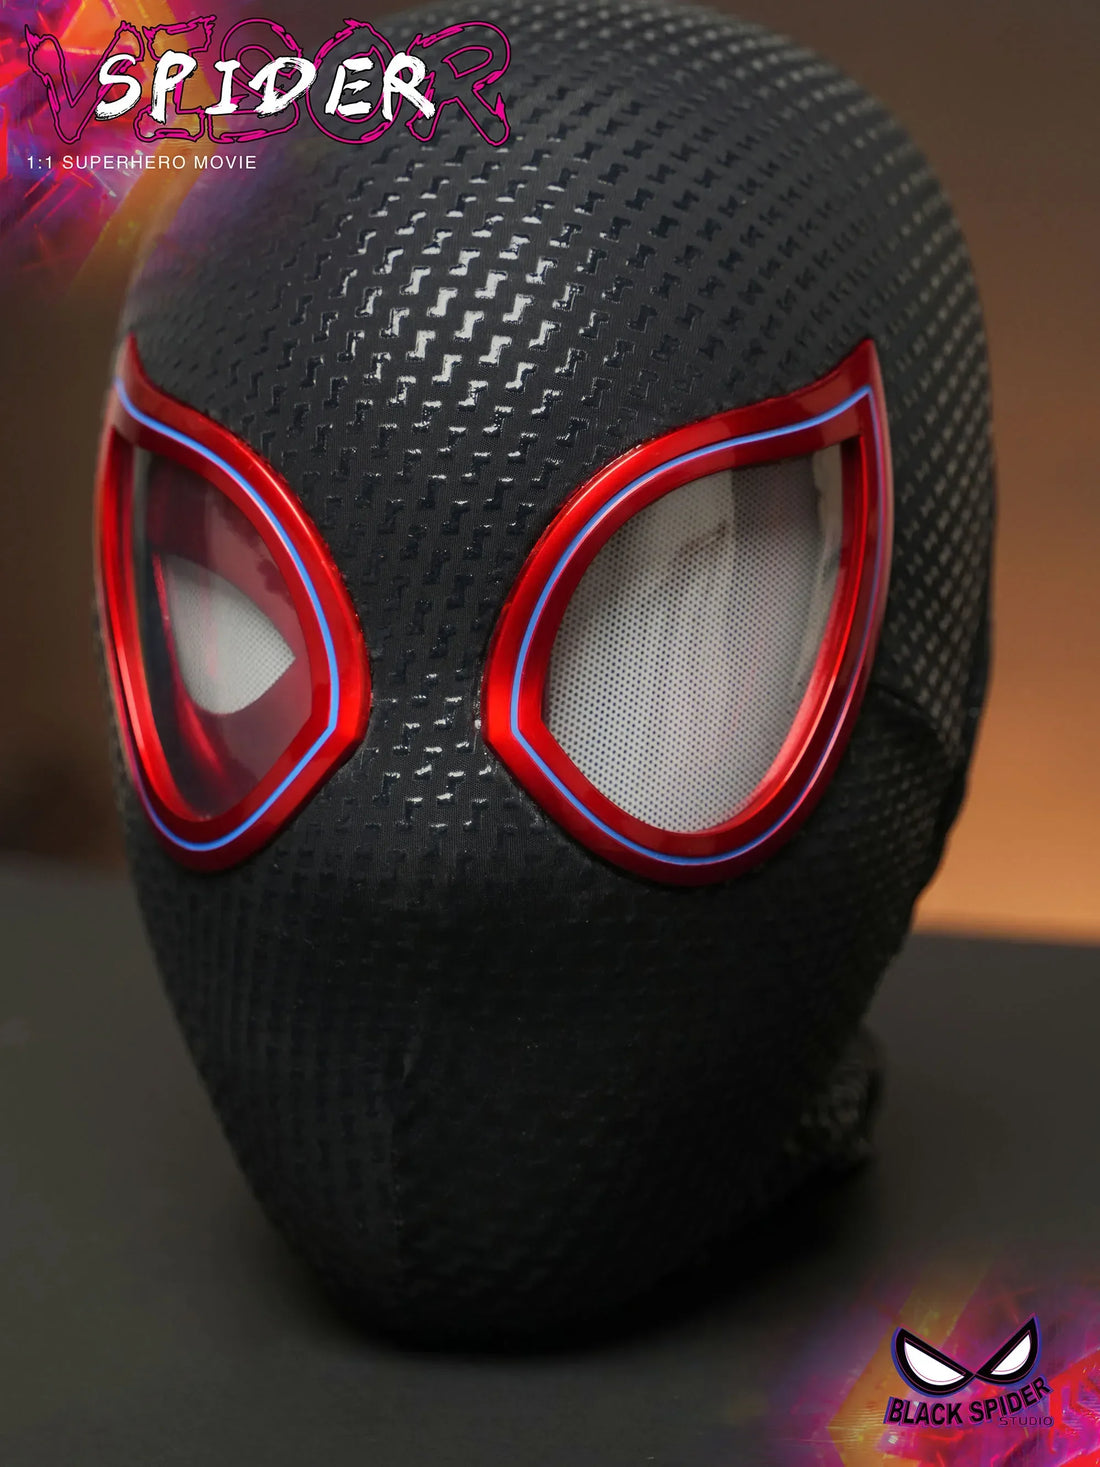 Mascara Miles Spiderman Headgear Cosplay Moving Eyes Electronic Mask Spider Man 1:1 Remote Control Toys For Adults Xmas Gift